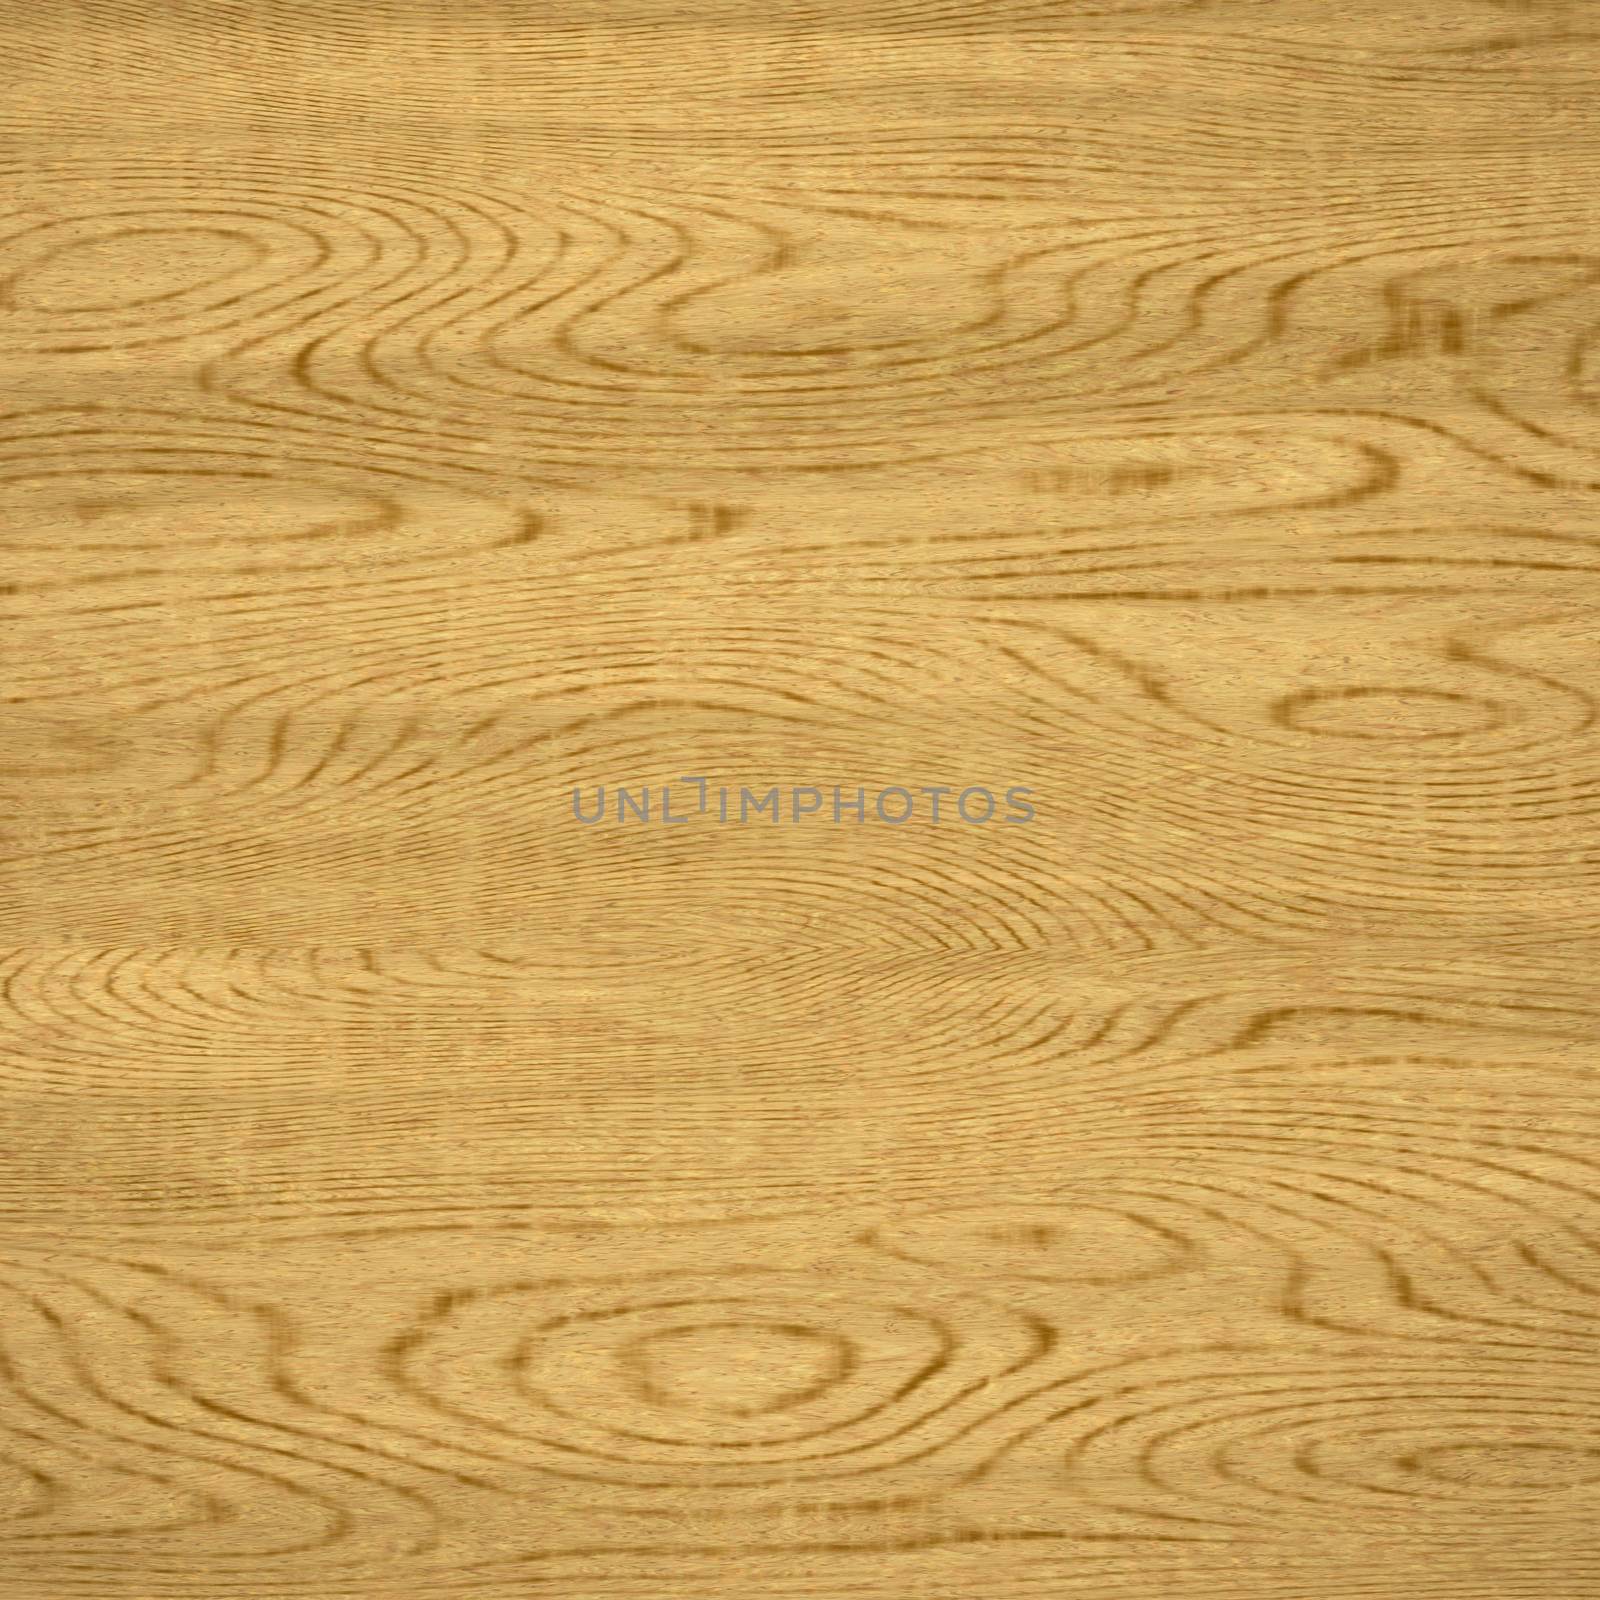 A typical honey color wooden background